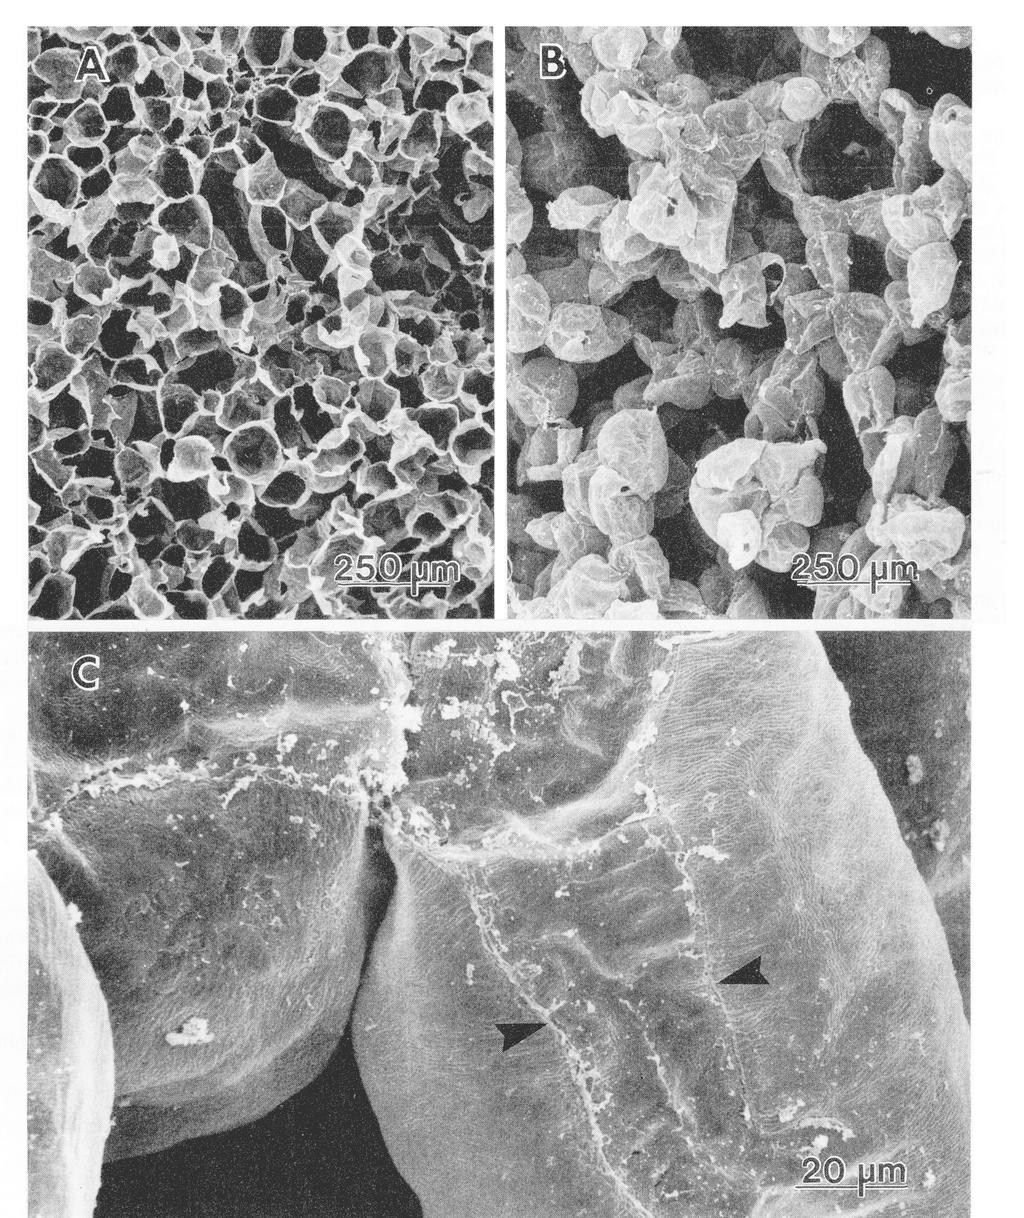 Fig. 8. Scanning electron micrographs of the surface of fractured apple tissue cylinders.